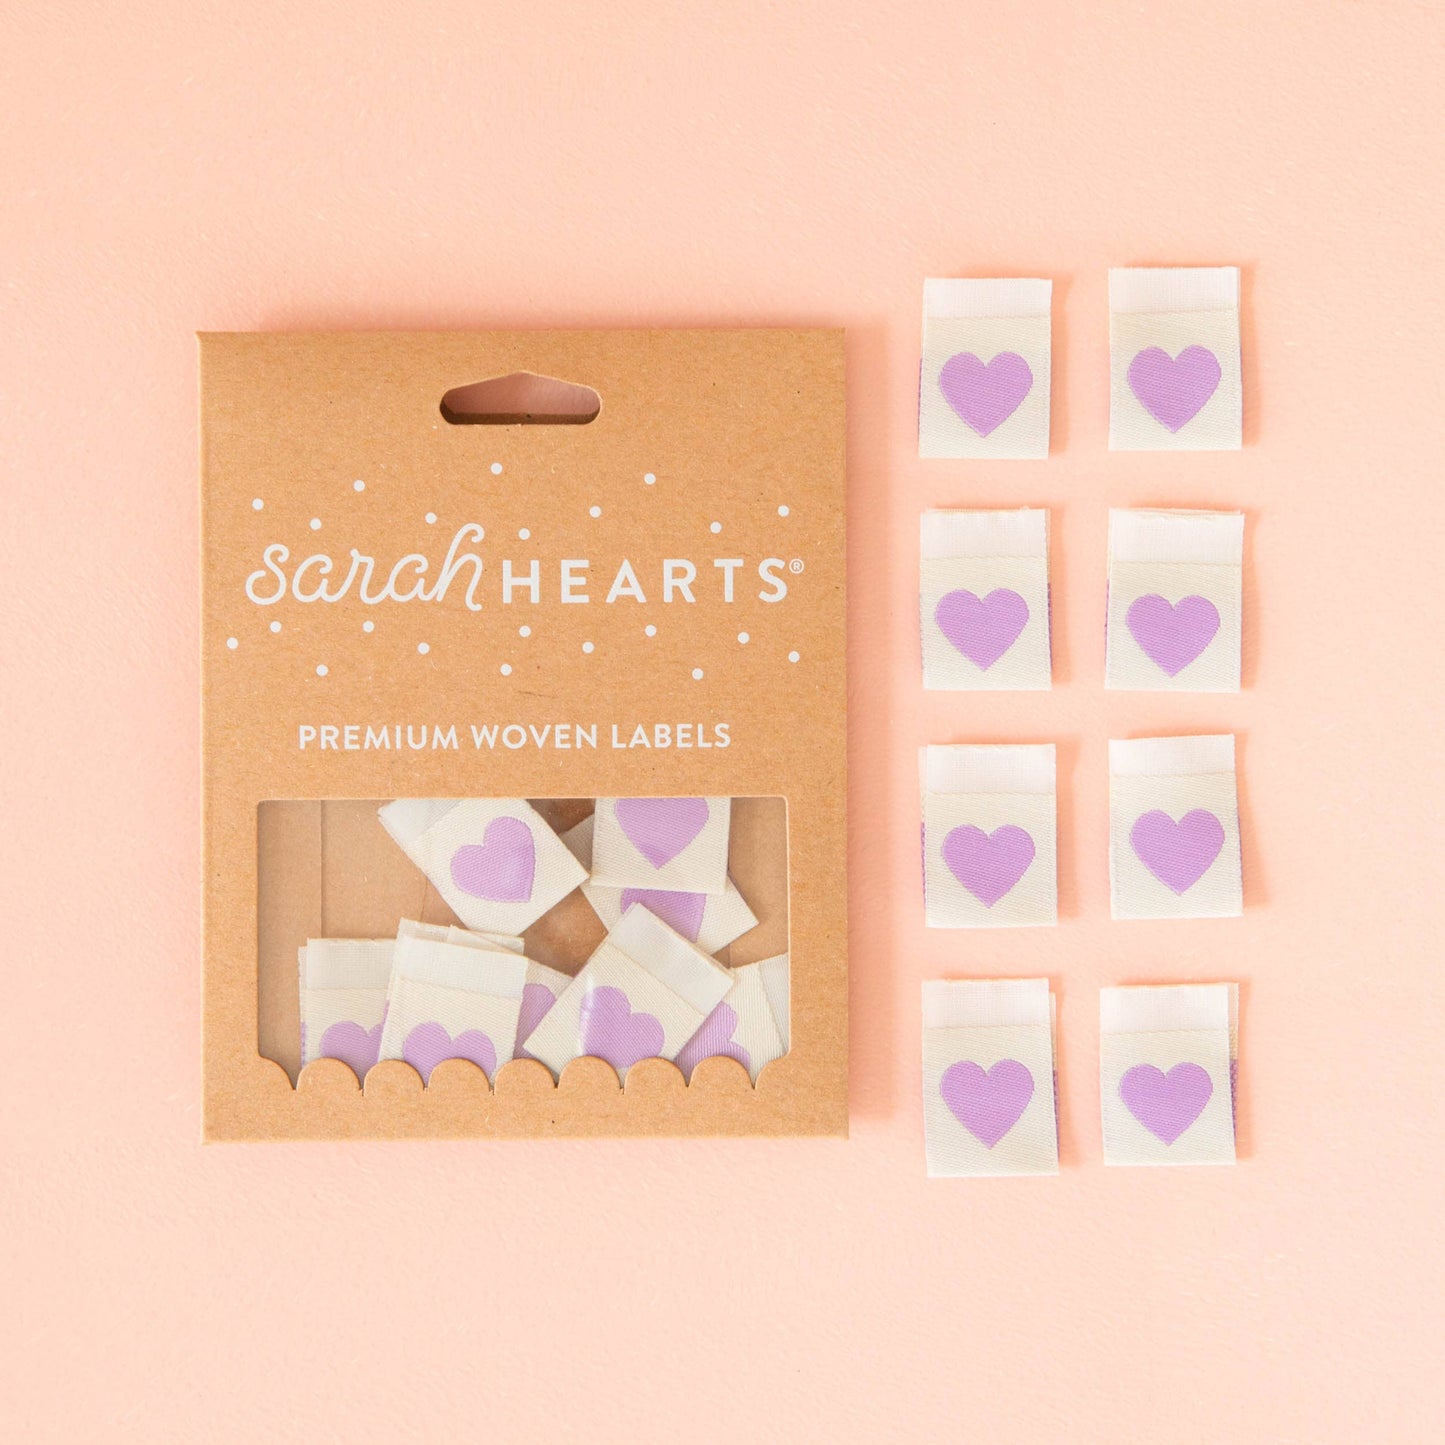 Sarah Hearts - Purple Heart Woven Labels  - Sewing Woven Clothing Label Tag